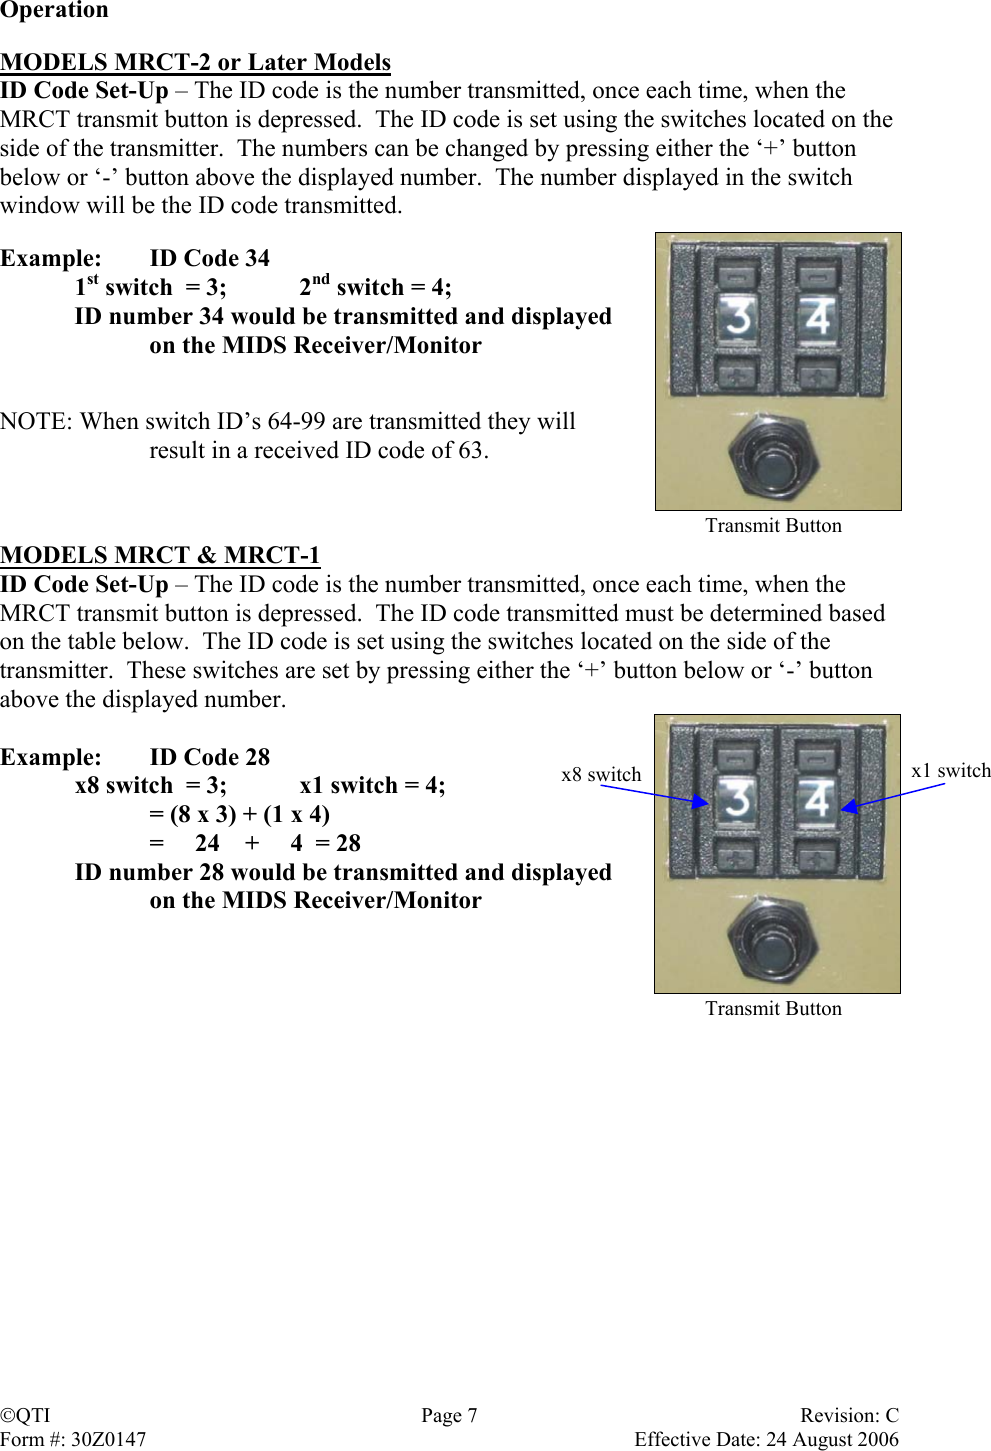 Operation  MODELS MRCT-2 or Later Models ID Code Set-Up – The ID code is the number transmitted, once each time, when the MRCT transmit button is depressed.  The ID code is set using the switches located on the side of the transmitter.  The numbers can be changed by pressing either the ‘+’ button below or ‘-’ button above the displayed number.  The number displayed in the switch window will be the ID code transmitted.   Example:  ID Code 34  1st switch  = 3;   2nd switch = 4;   ID number 34 would be transmitted and displayed     on the MIDS Receiver/Monitor   NOTE: When switch ID’s 64-99 are transmitted they will  result in a received ID code of 63.    Transmit ButtonMODELS MRCT &amp; MRCT-1 ID Code Set-Up – The ID code is the number transmitted, once each time, when the MRCT transmit button is depressed.  The ID code transmitted must be determined based on the table below.  The ID code is set using the switches located on the side of the transmitter.  These switches are set by pressing either the ‘+’ button below or ‘-’ button above the displayed number.  Example:  ID Code 28   x8 switch  = 3;   x1 switch = 4;     = (8 x 3) + (1 x 4)     =     24    +     4  = 28   ID number 28 would be transmitted and displayed x1 switchx8 switch    on the MIDS Receiver/Monitor    Transmit ButtonQTI Page 7 Revision: C Form #: 30Z0147    Effective Date: 24 August 2006  